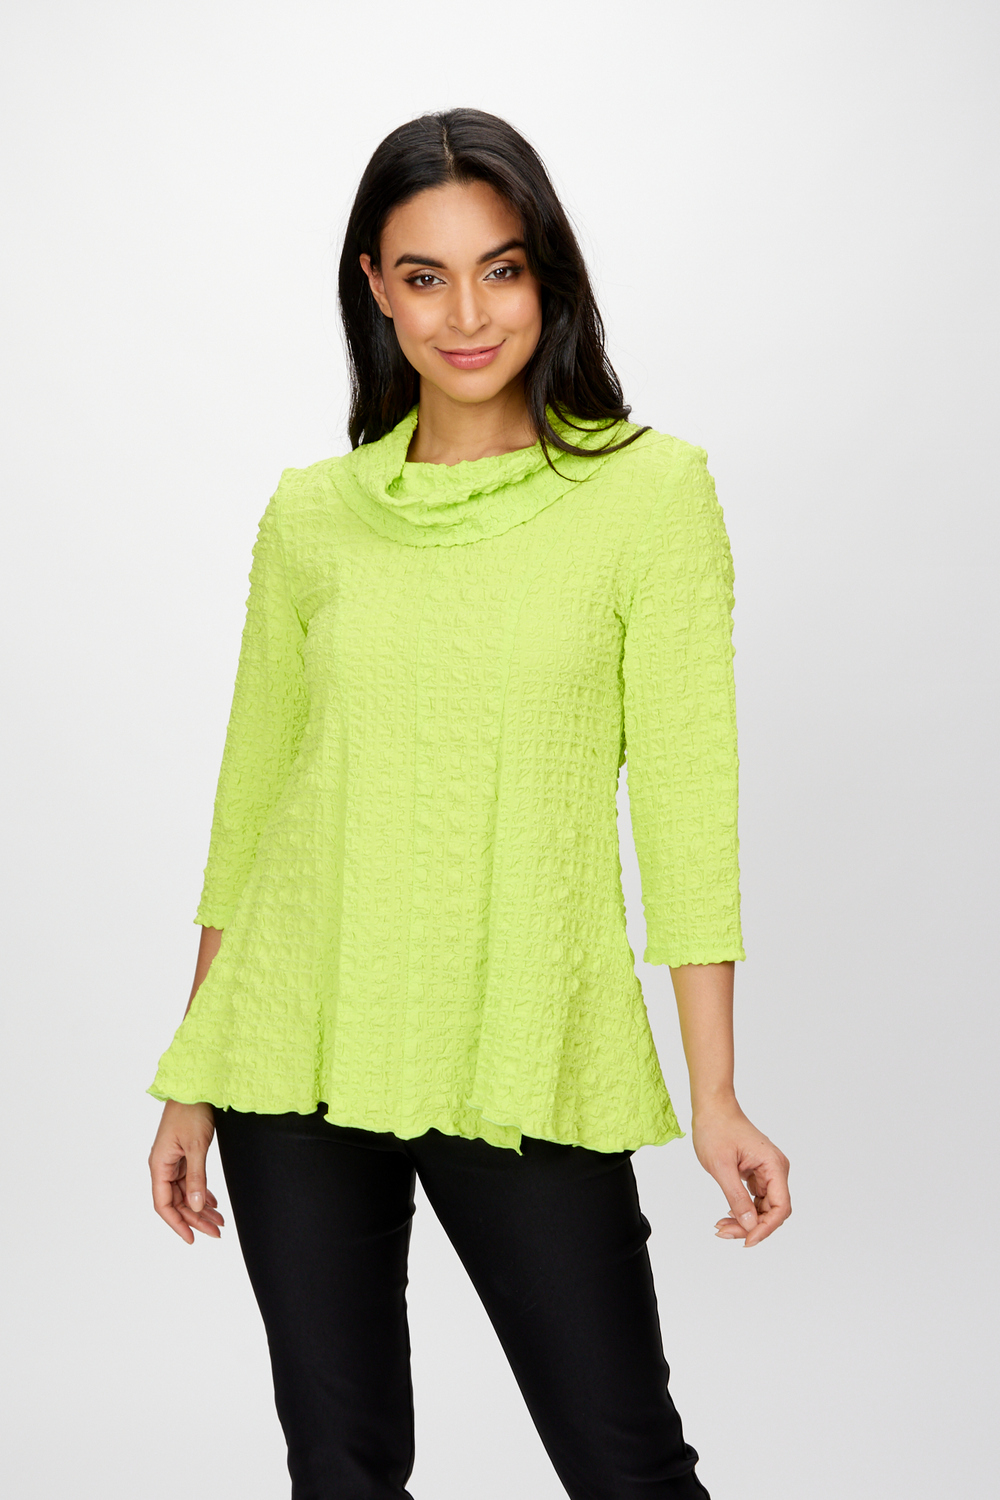 Textured Shawl Collar Top Style 242120. Key Lime